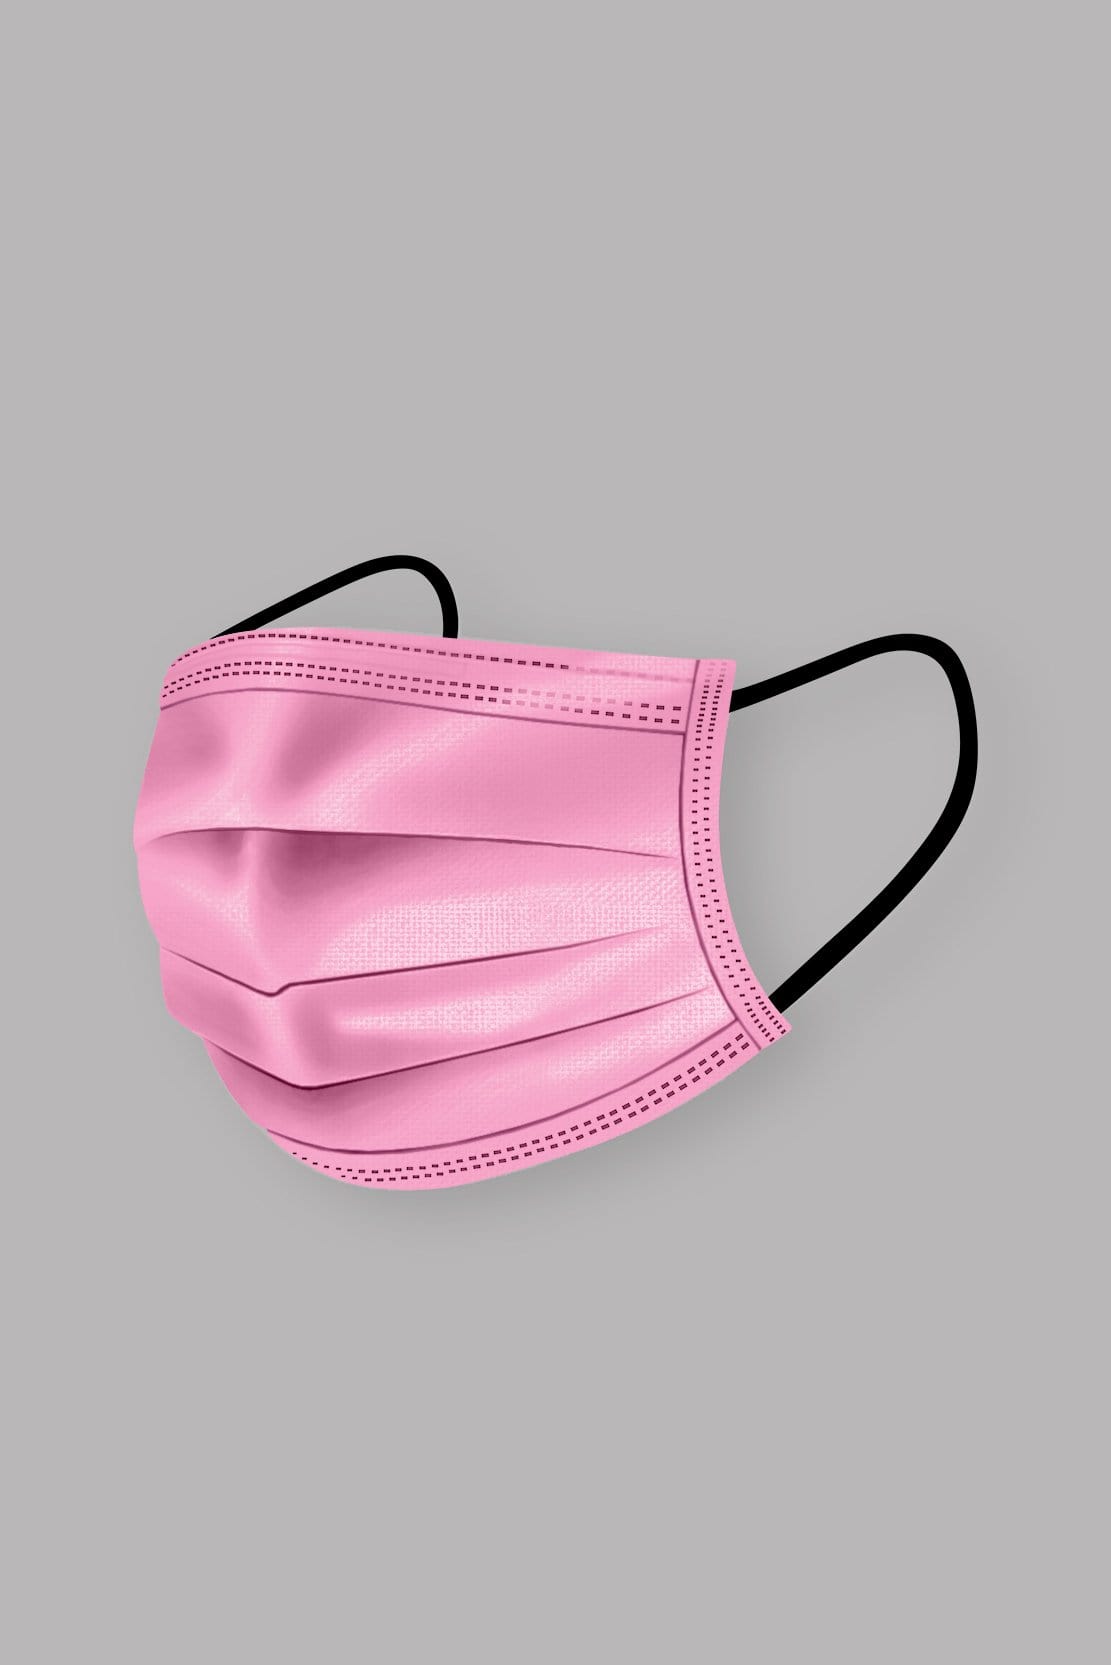 Stylish Light Pink Pleated face mask, with soft black ear loops and high quality fabric. 